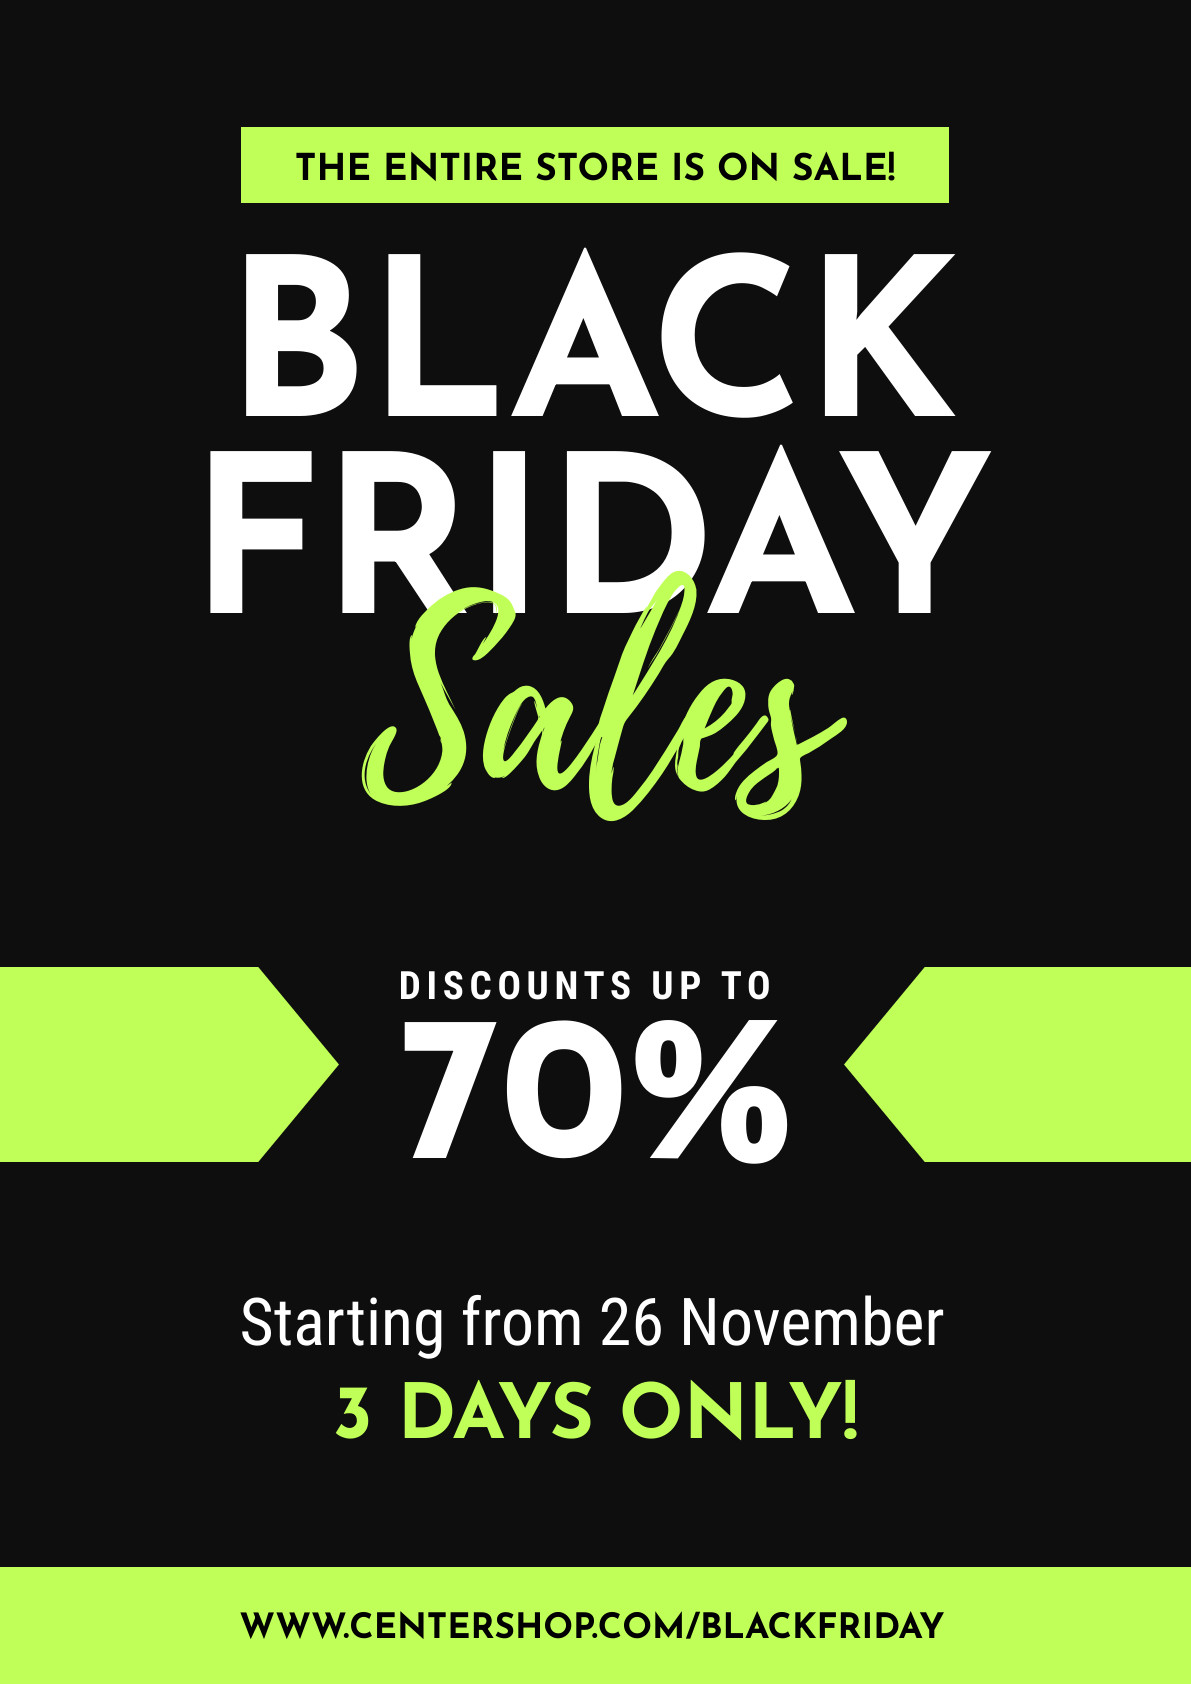 Black Friday Entire Store Sales 3 Days Only Poster 1191x1684